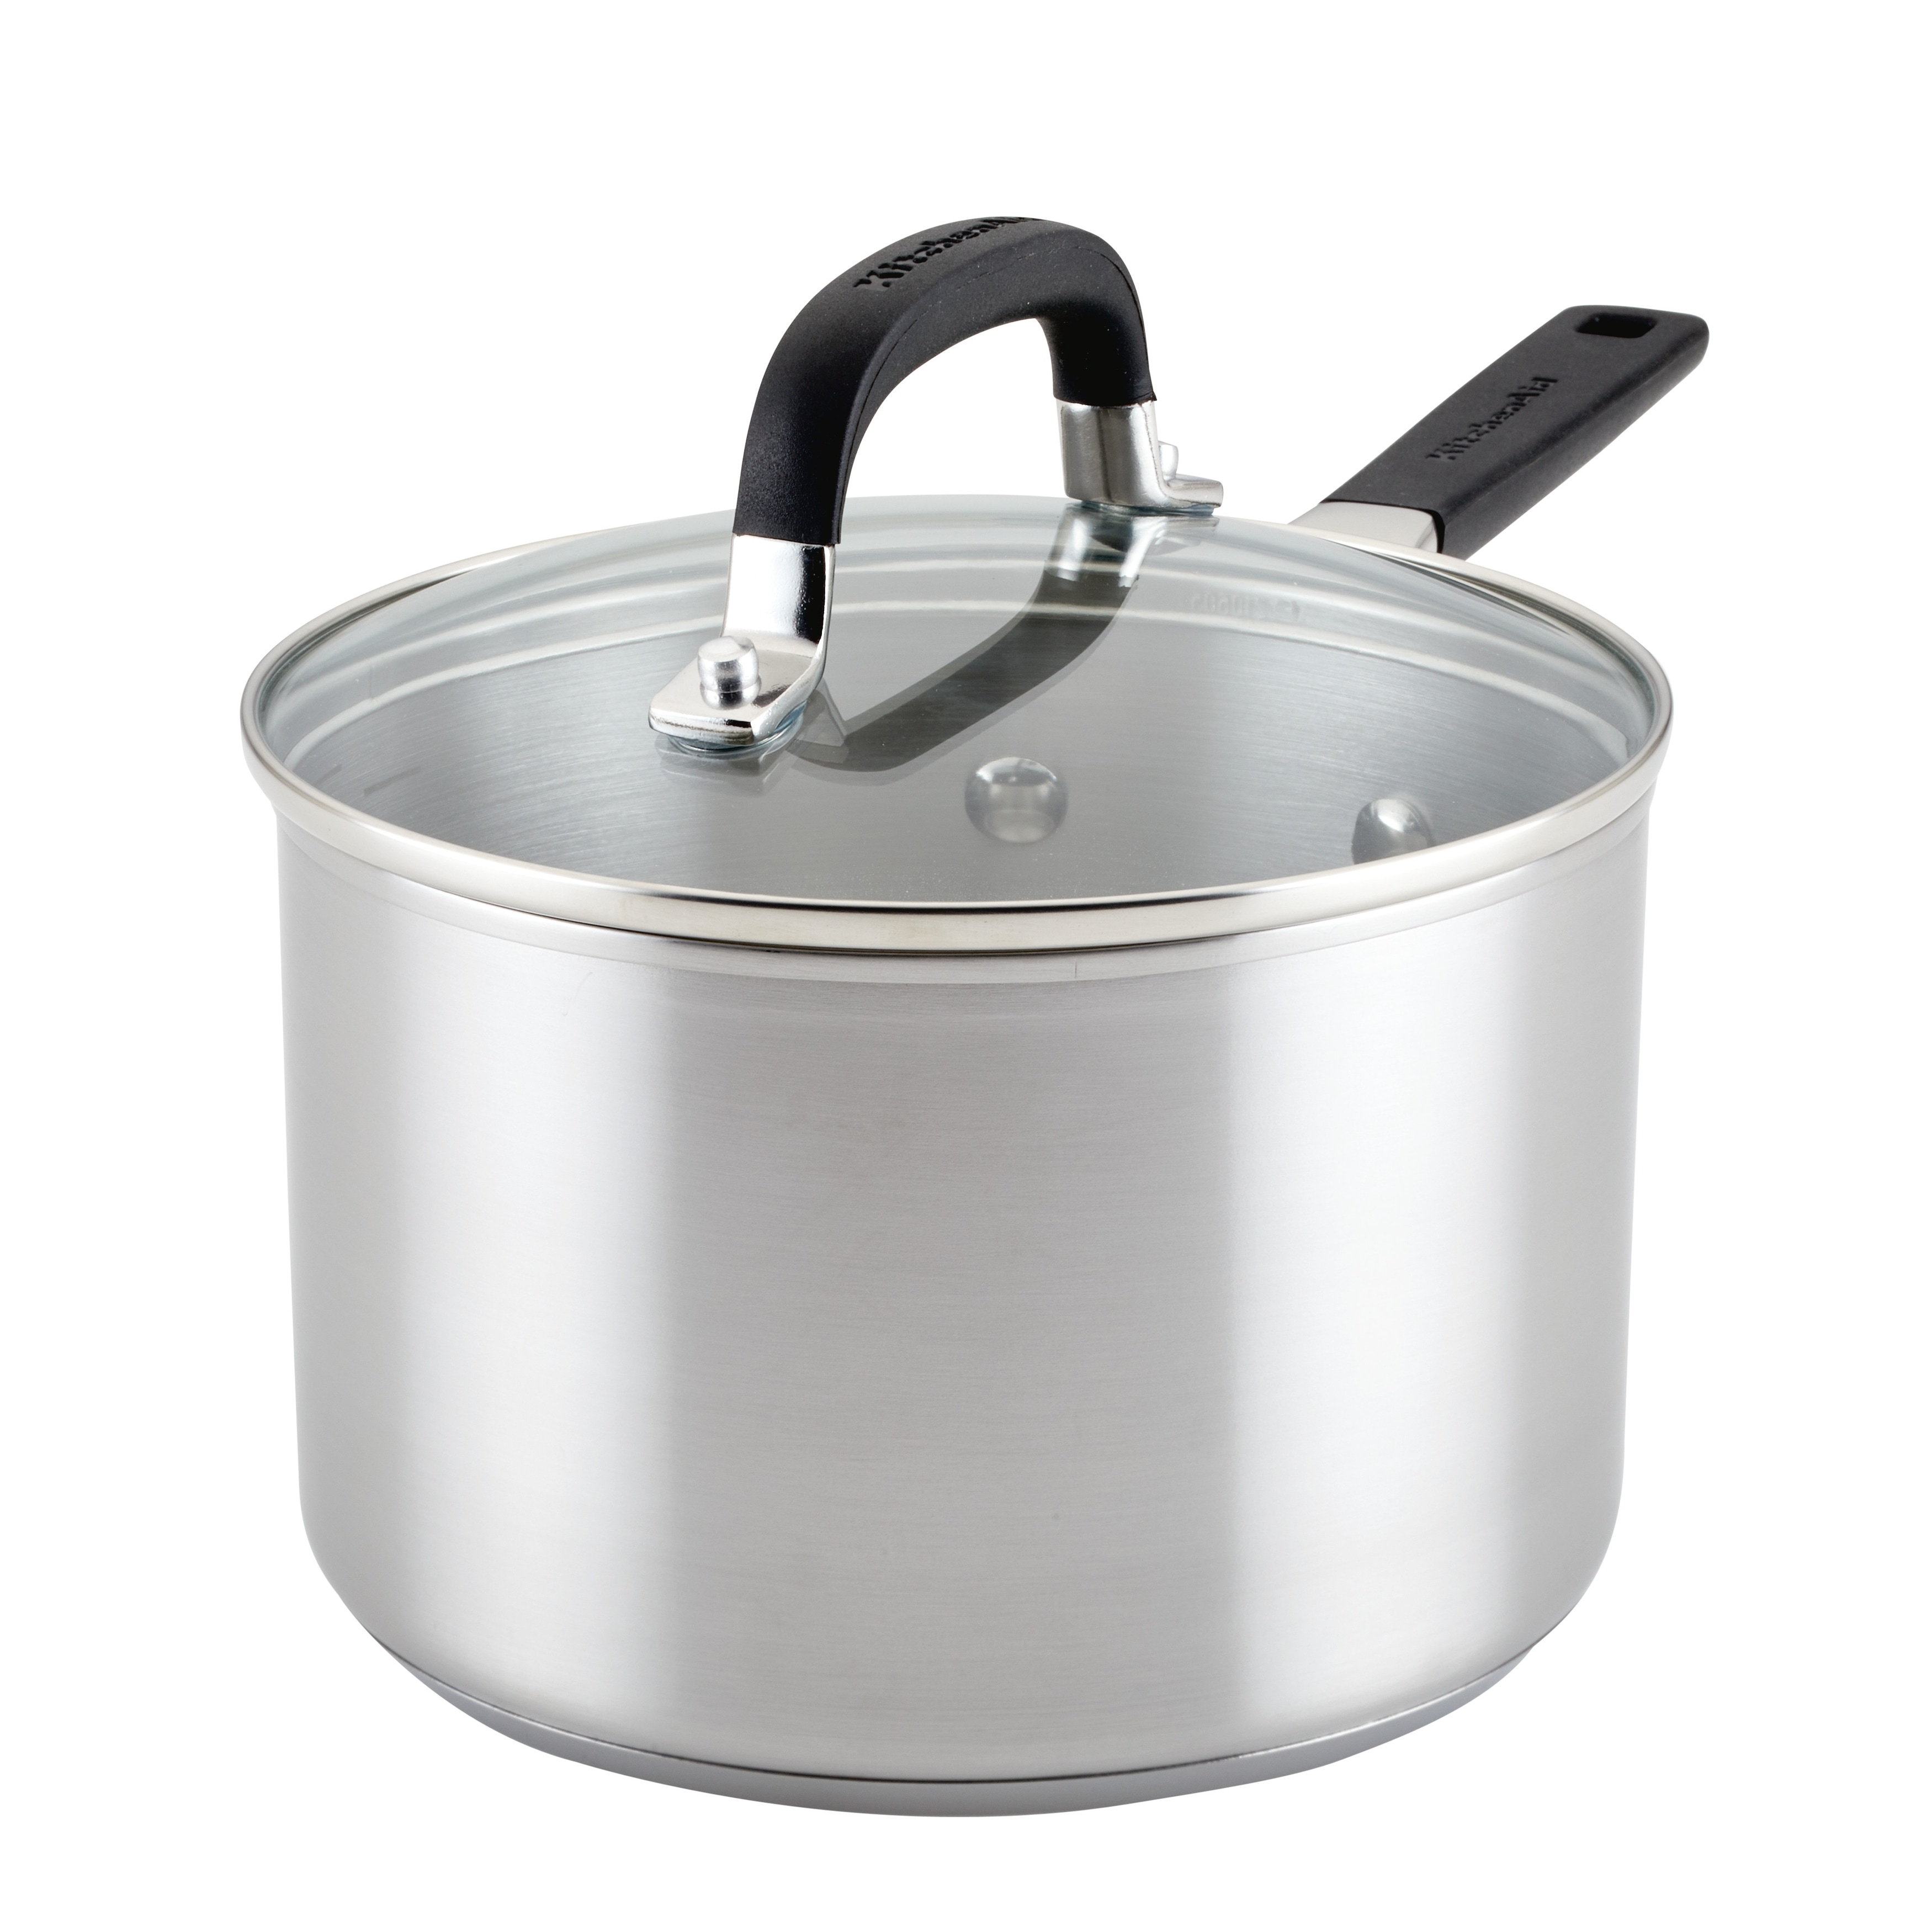 KitchenAid Stainless Steel Casserole with Lid, 4-Quart, Brushed Stainless  Steel & Reviews